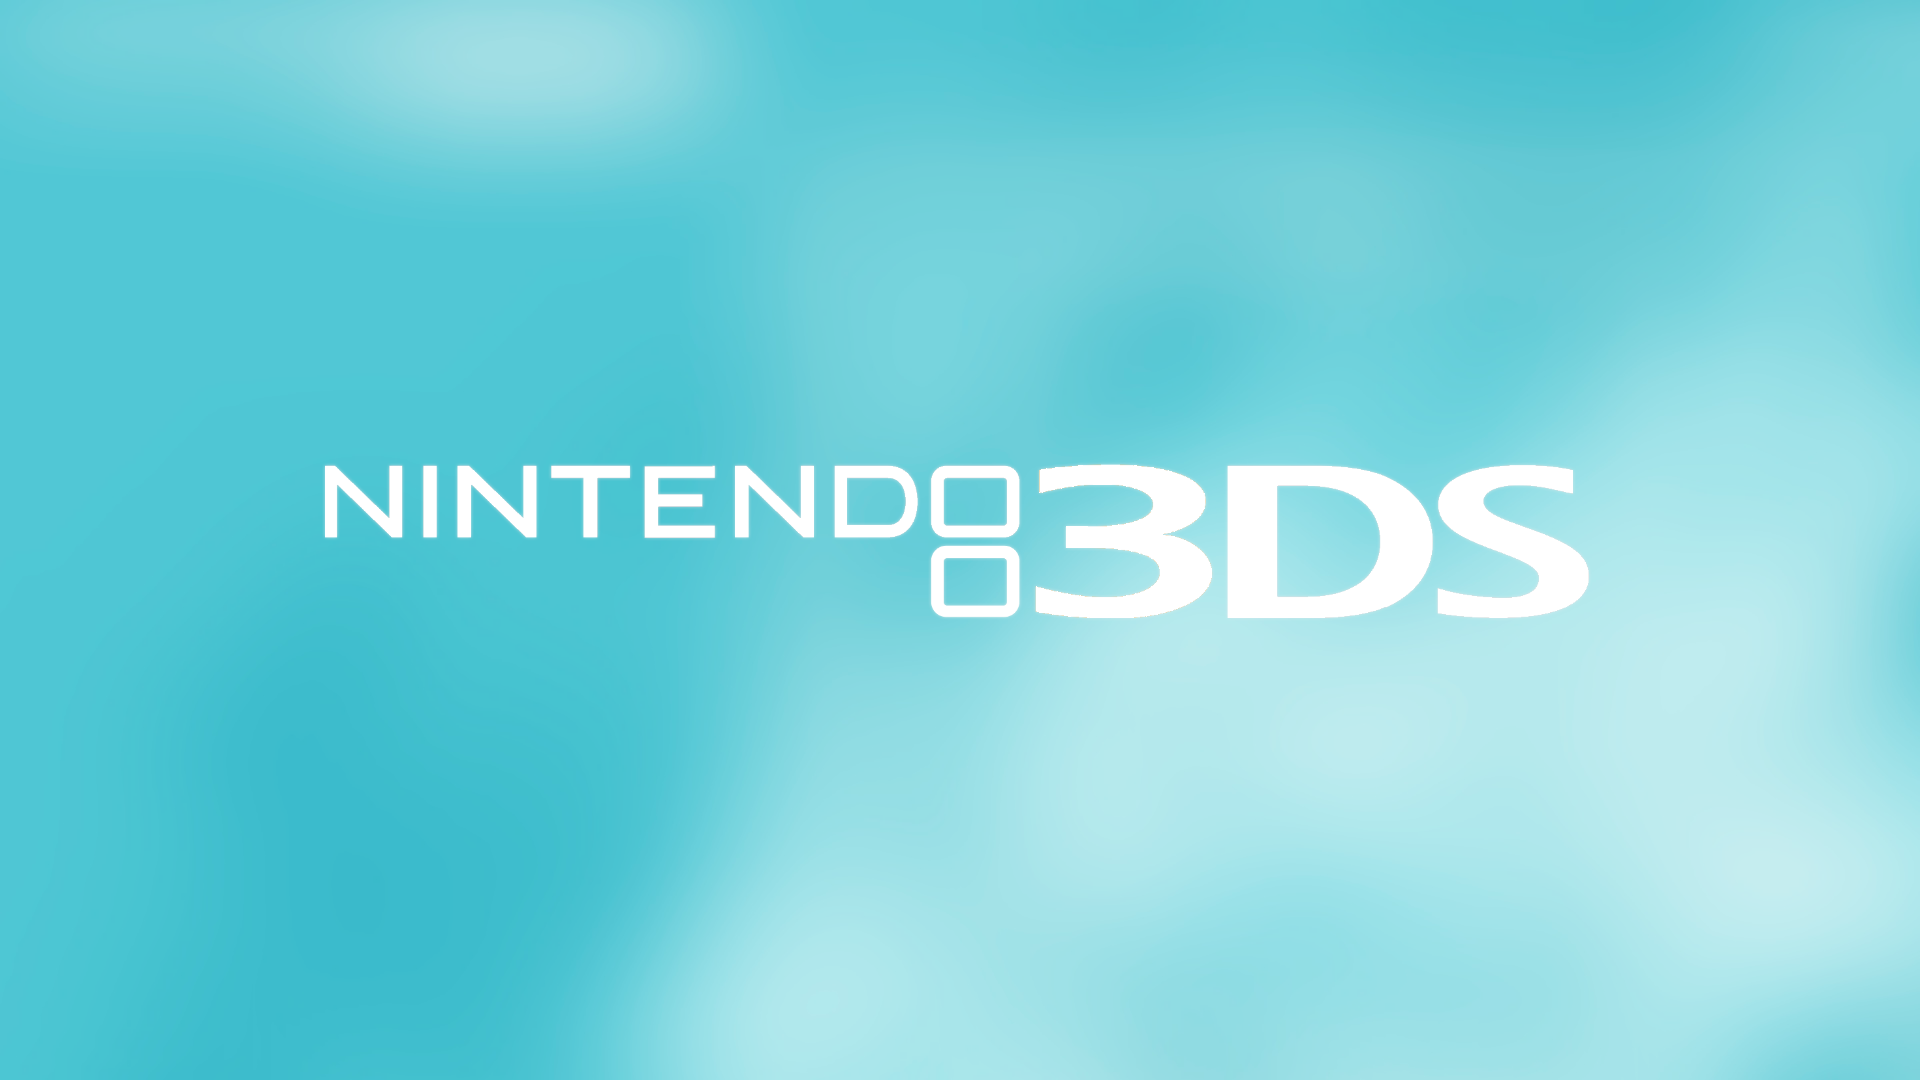 Nintendo ds hd papers and backgrounds